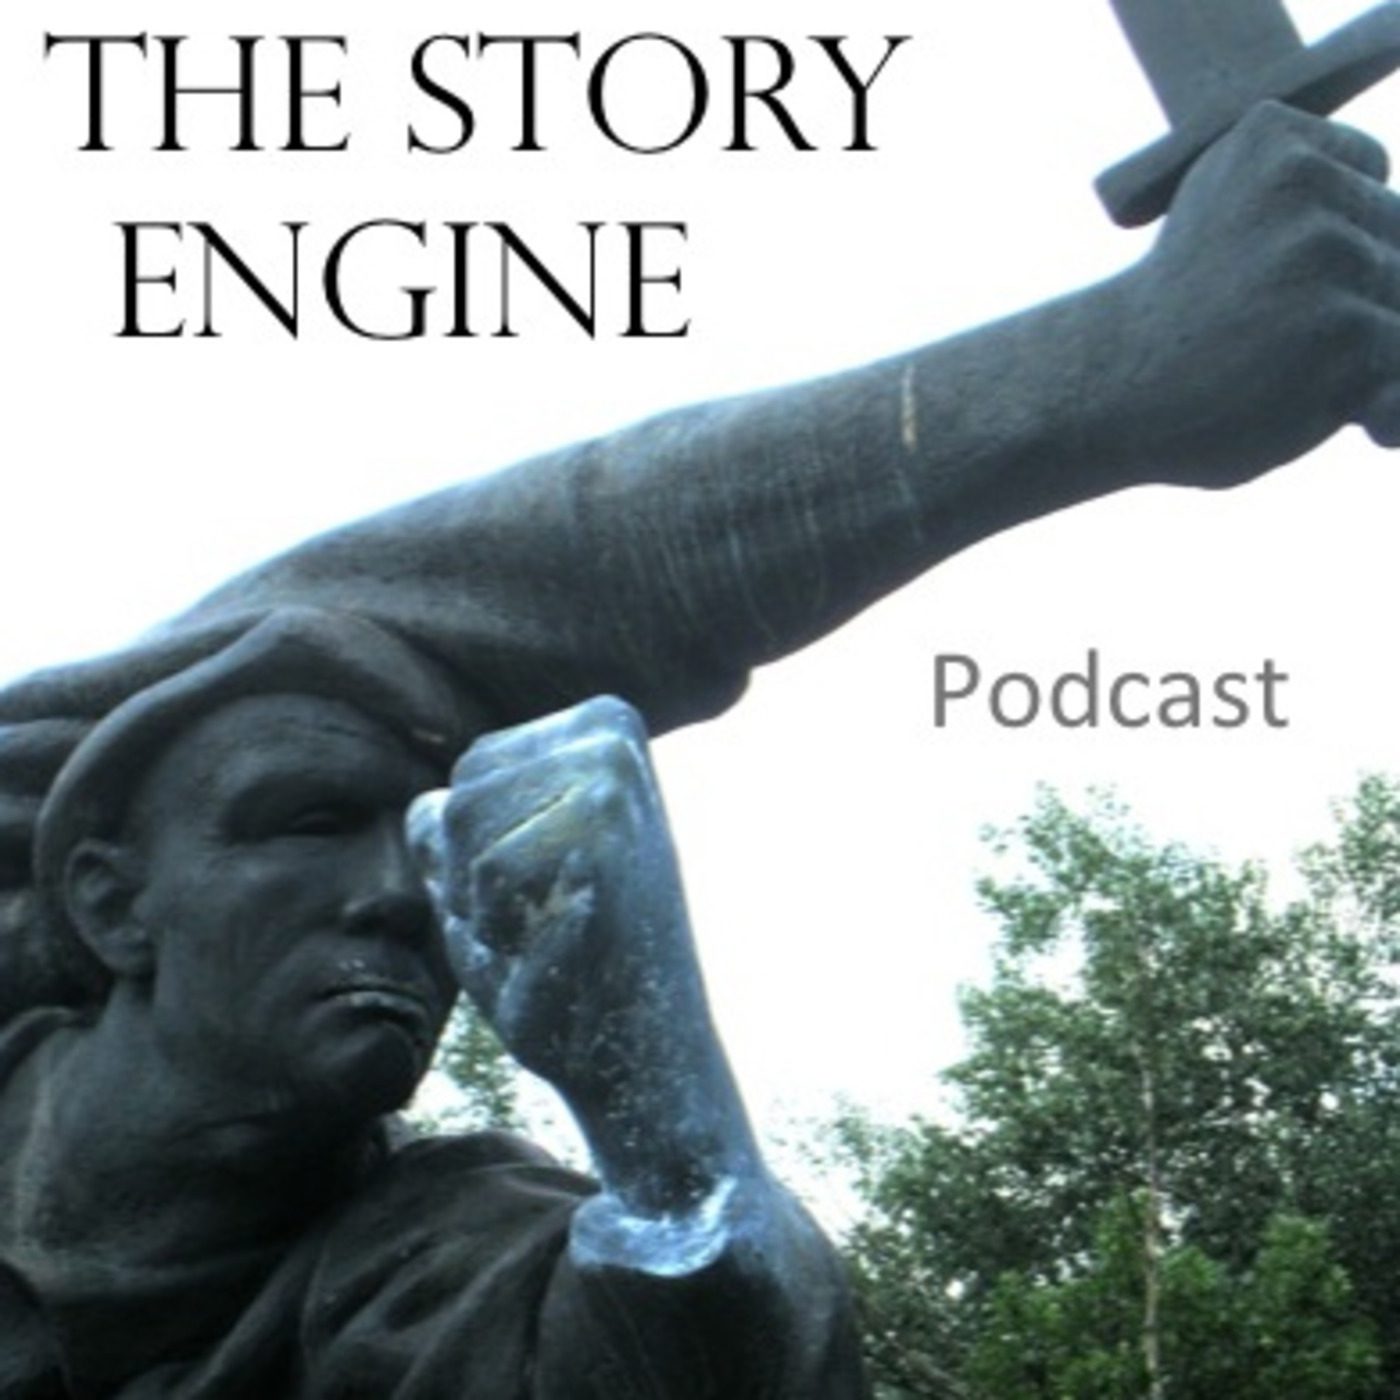 The Story Engine History Podcast